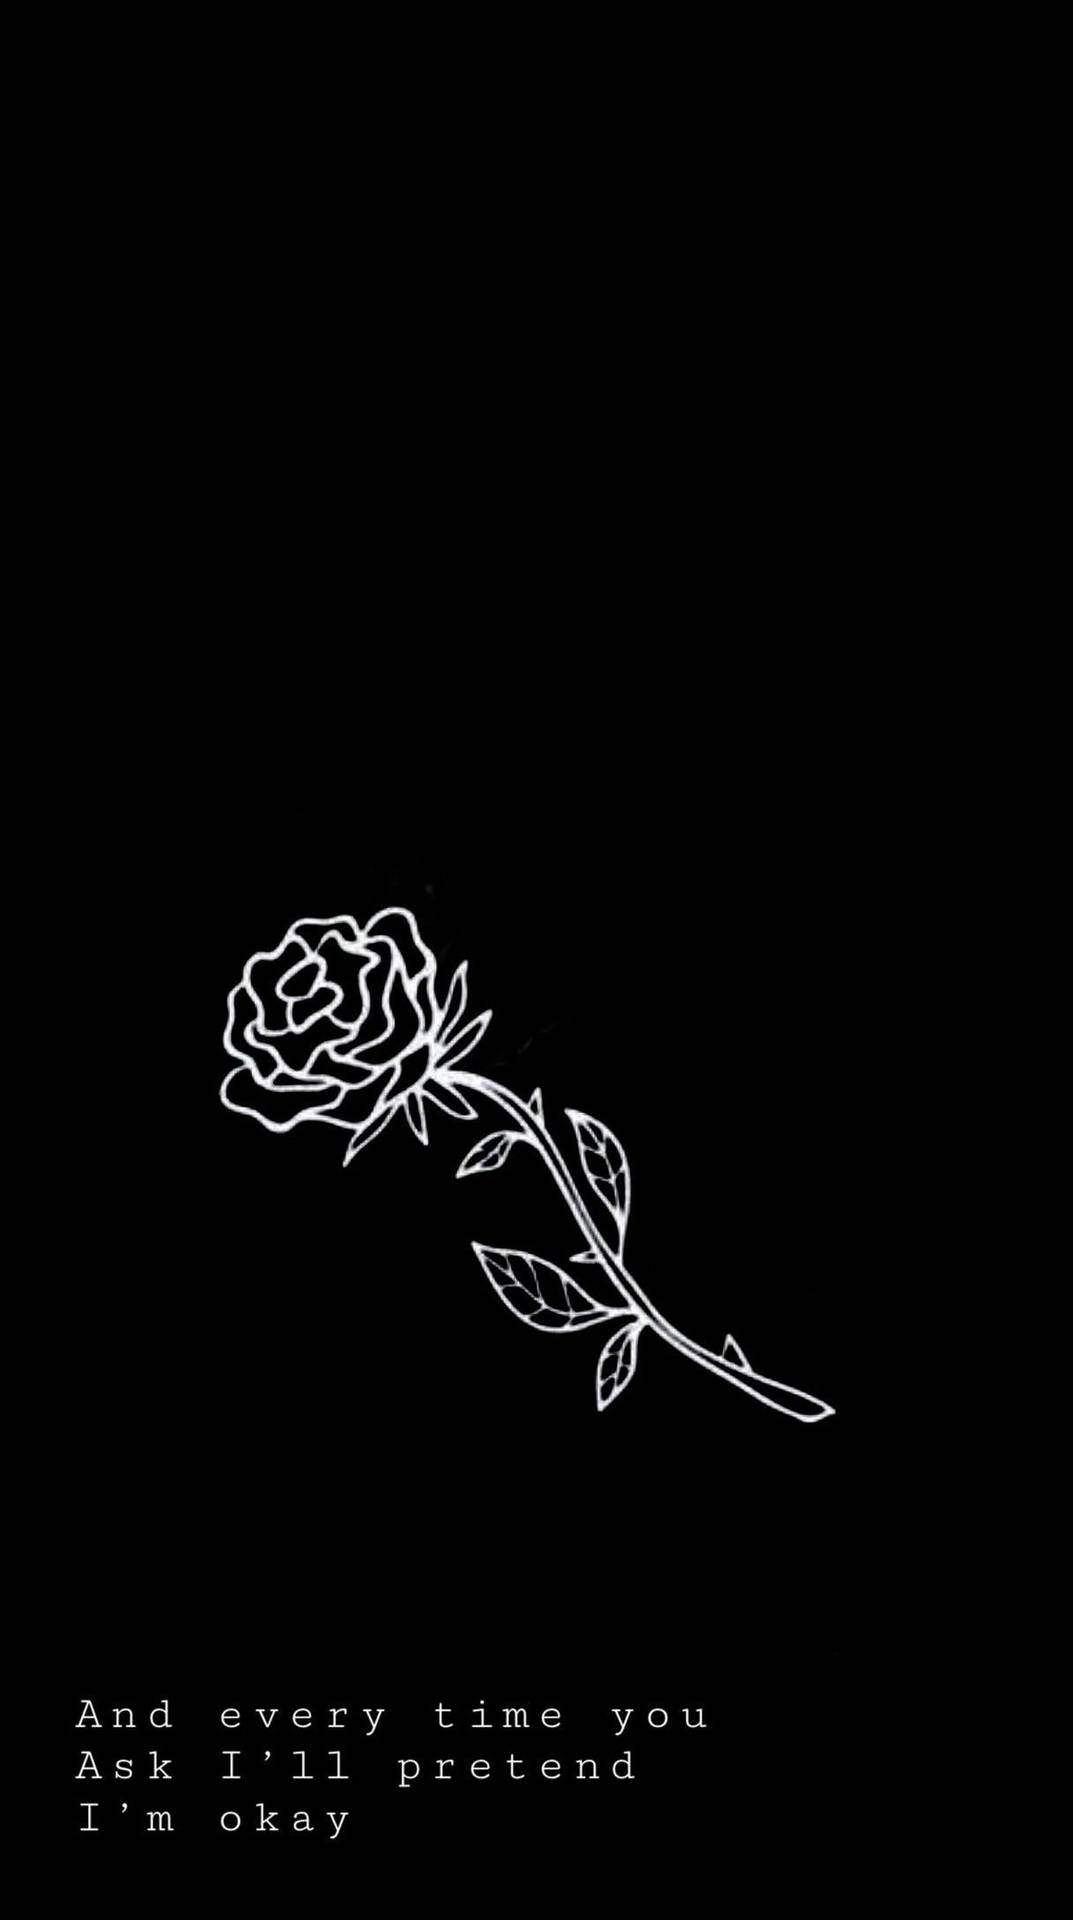 Okay Quote With Rose Illustration